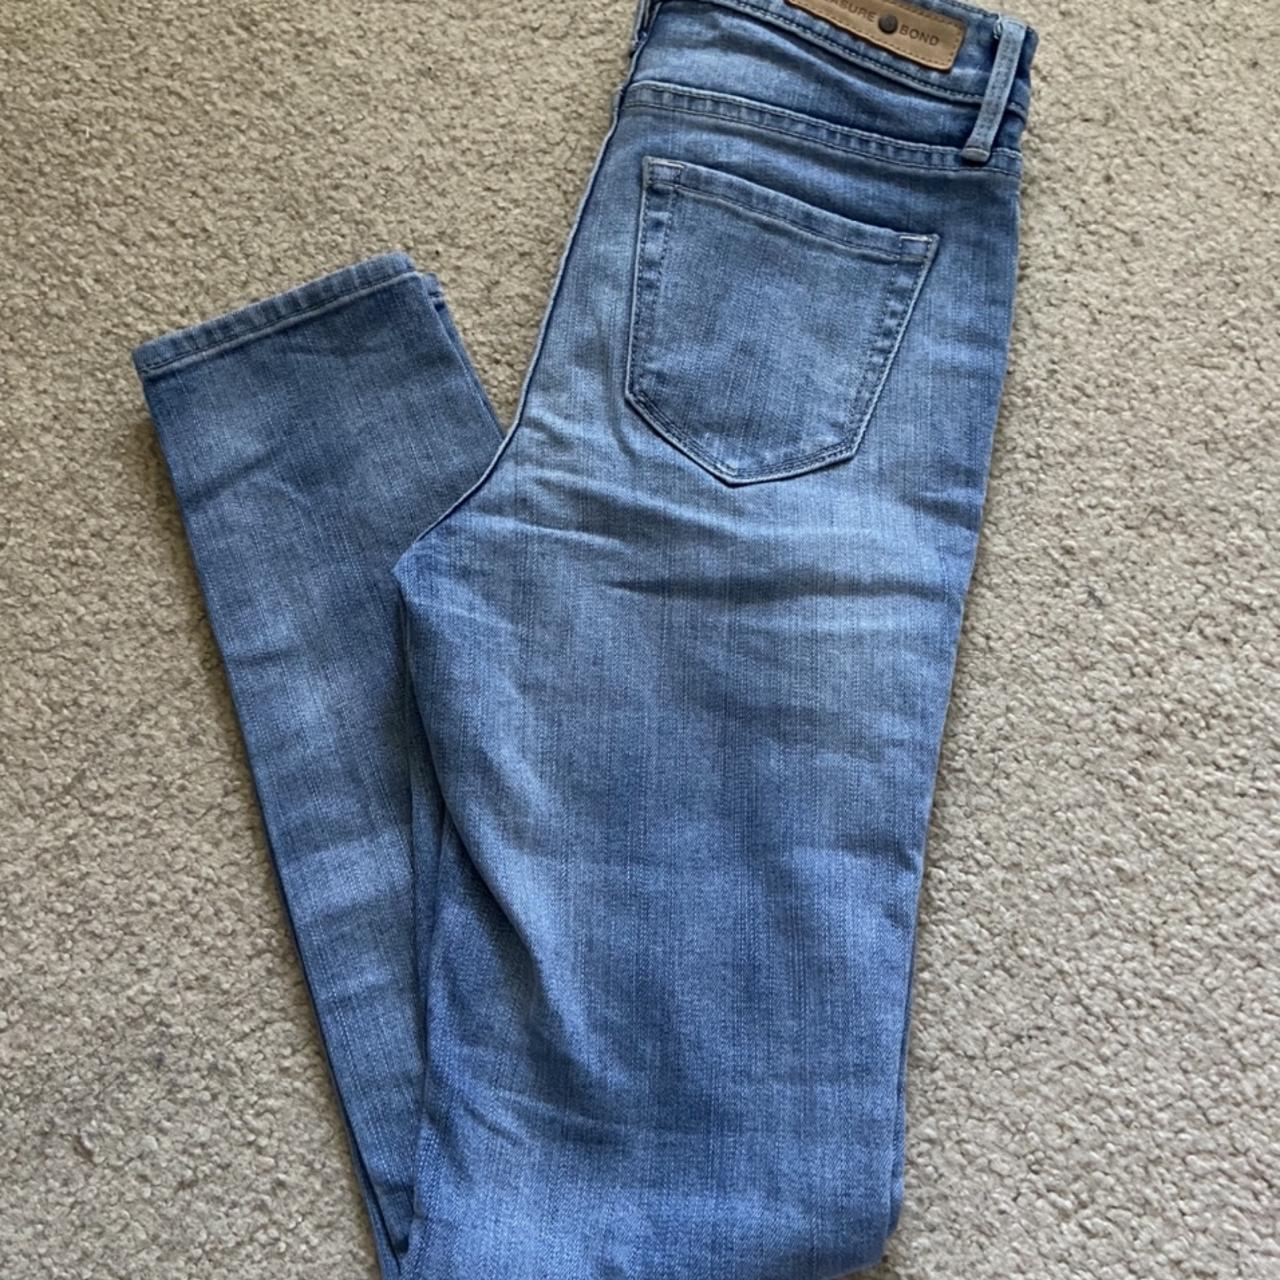 Treasure and bond jeans - worn only once! #pacsun... - Depop